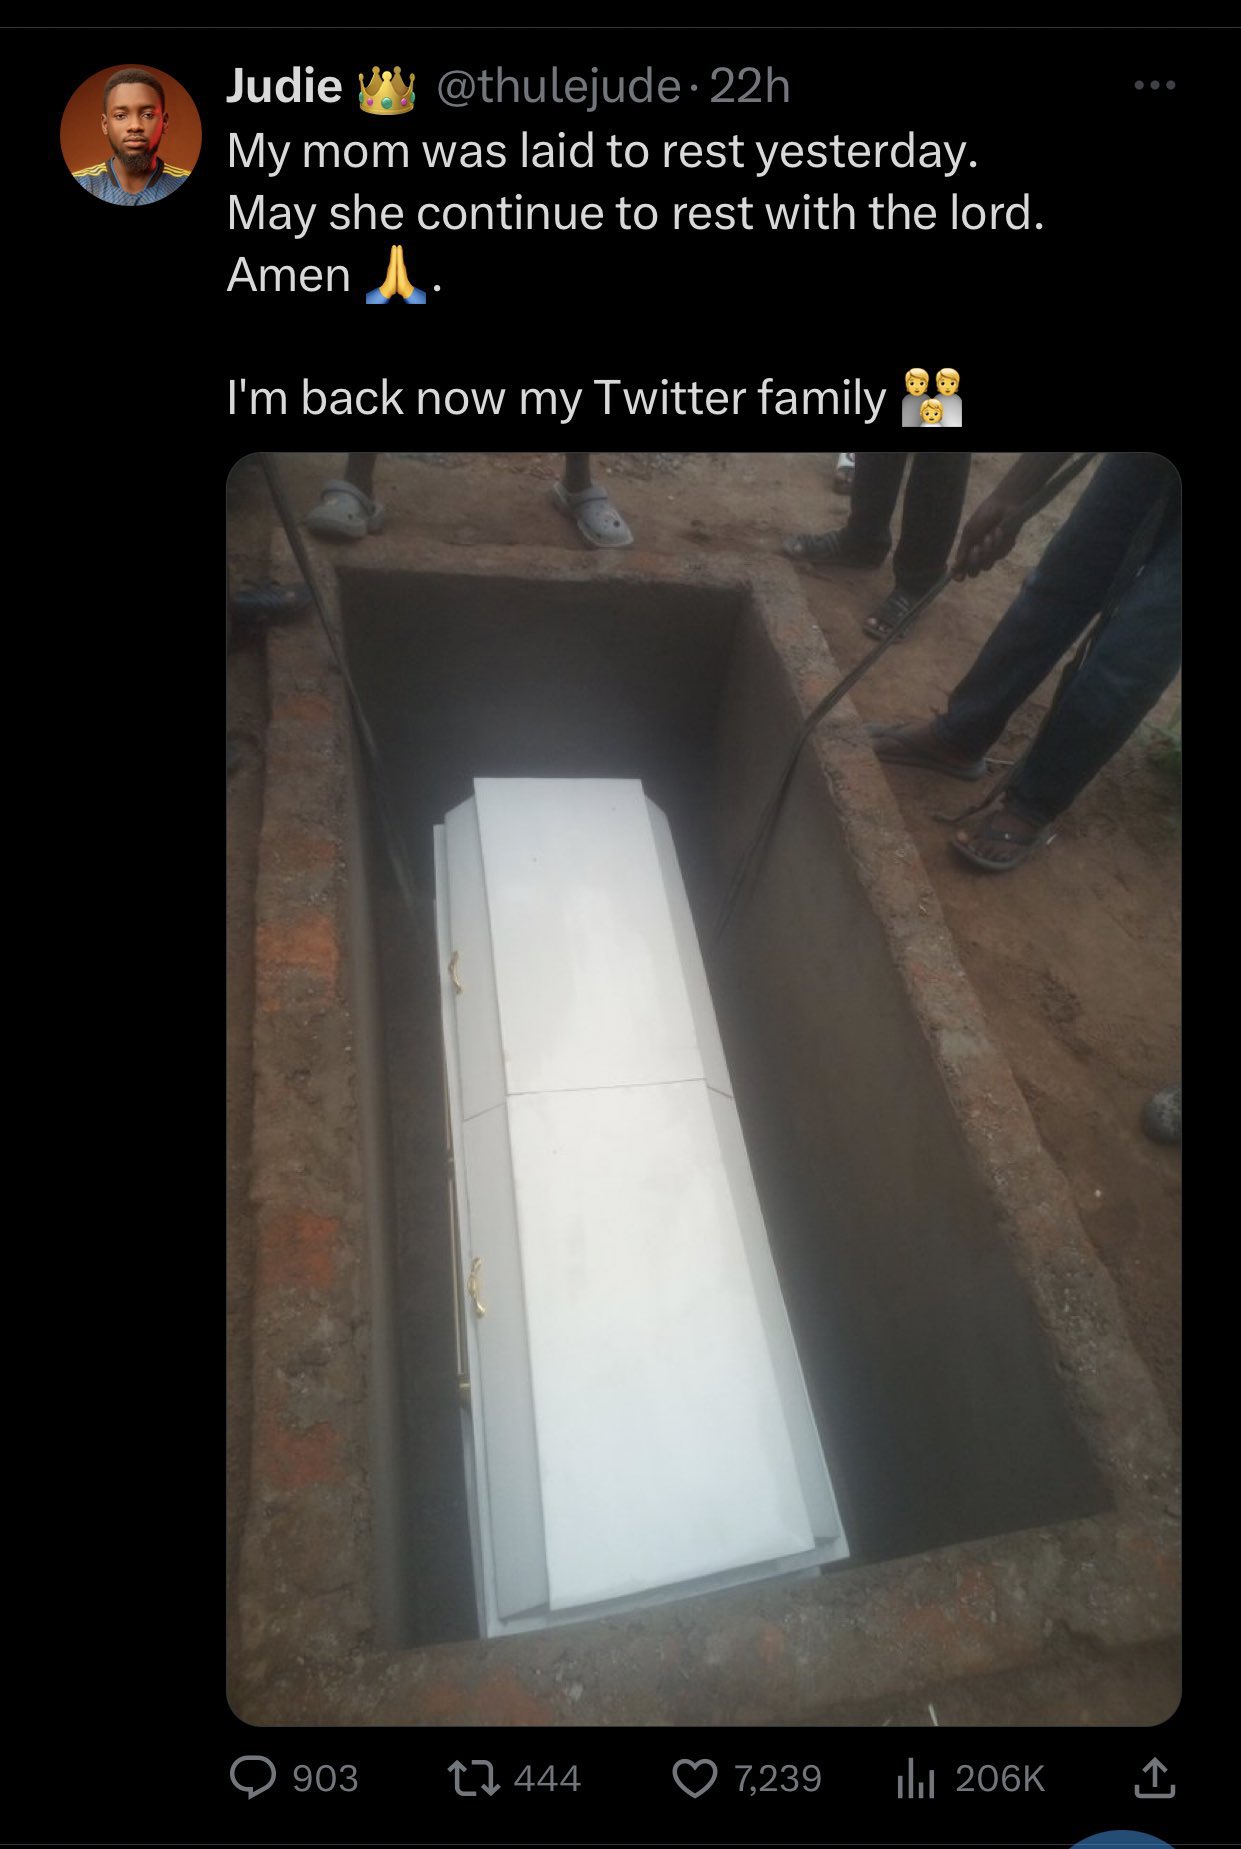 Double Wahala for d?adbody as two twitter users claim ownership of a graveside photo